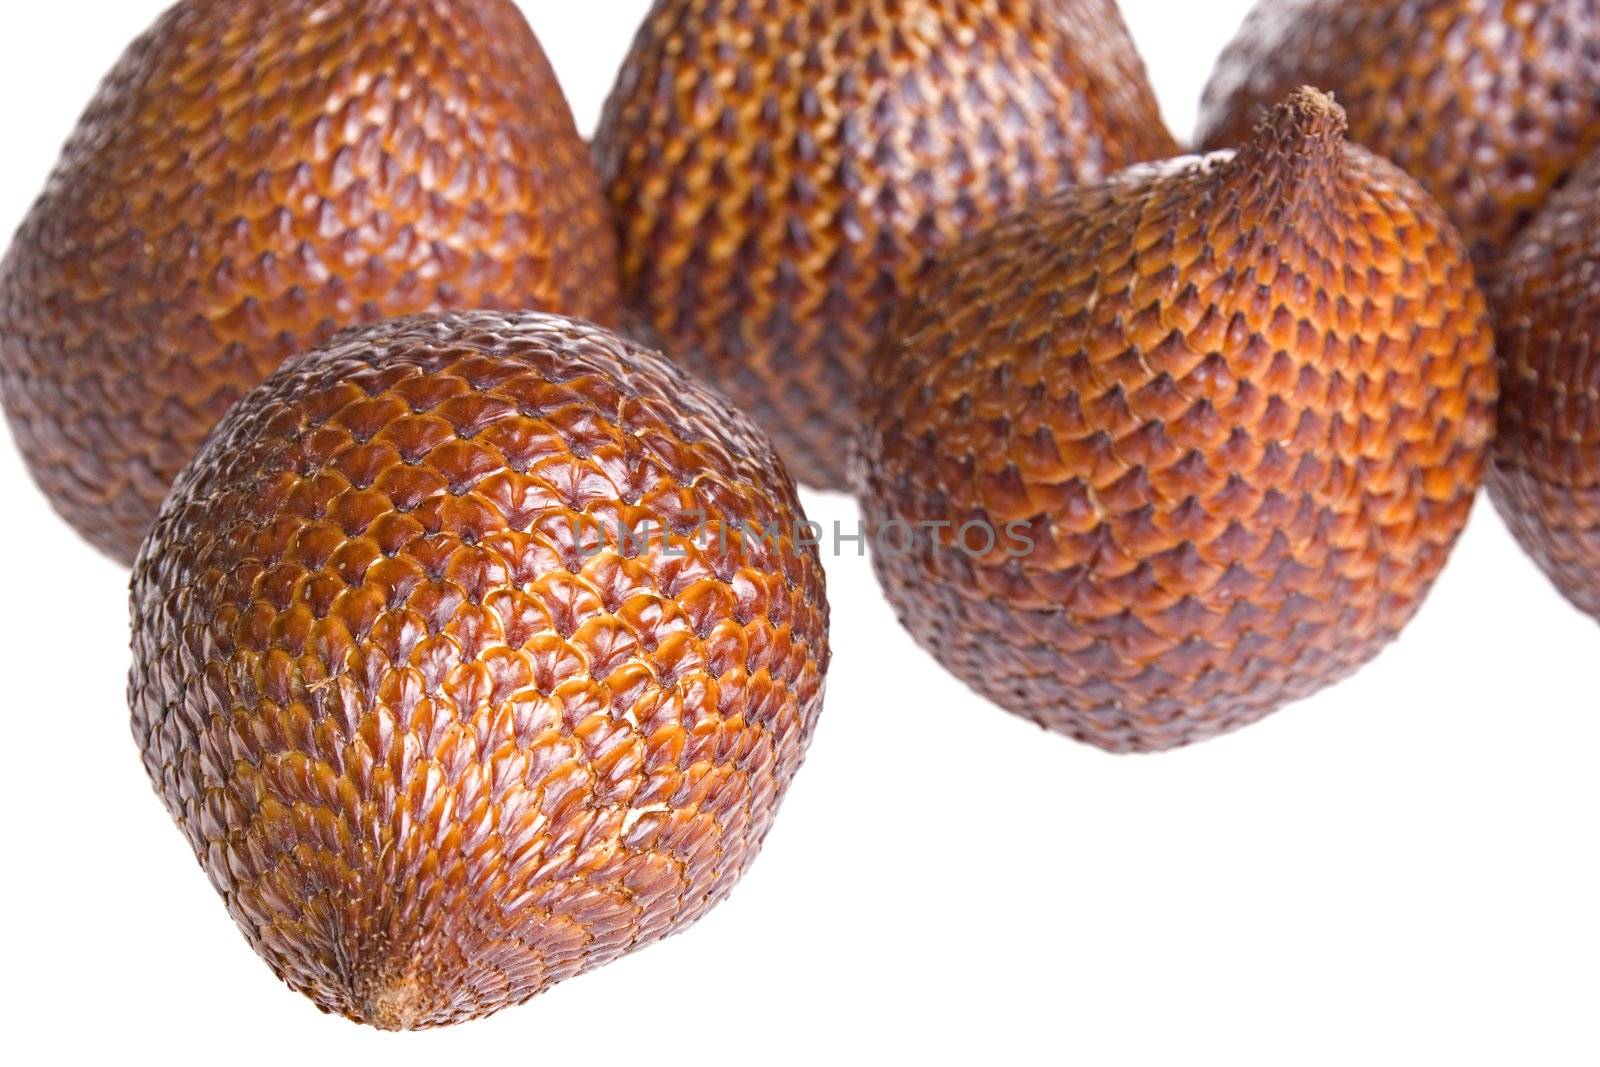 Isolated close-up image of Snake Fruits, commonly known locally as Buah Salak.